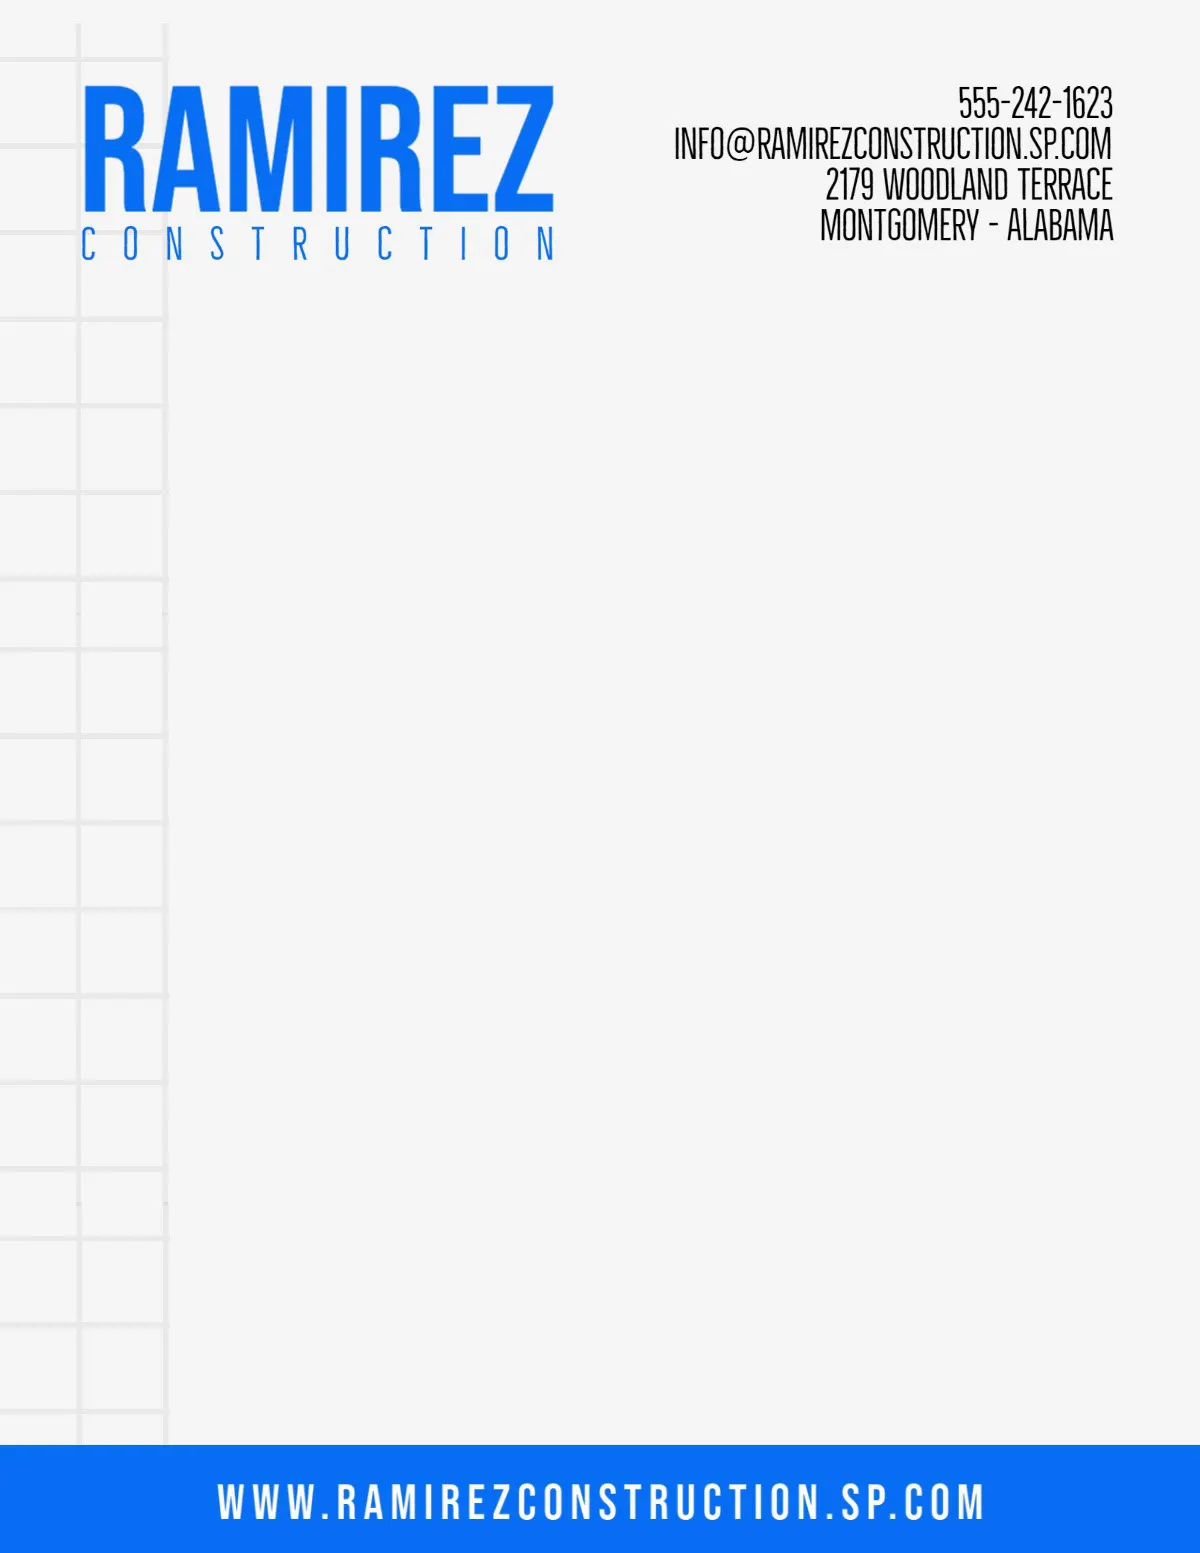 Blue and White Modern Style Construction Letterhead